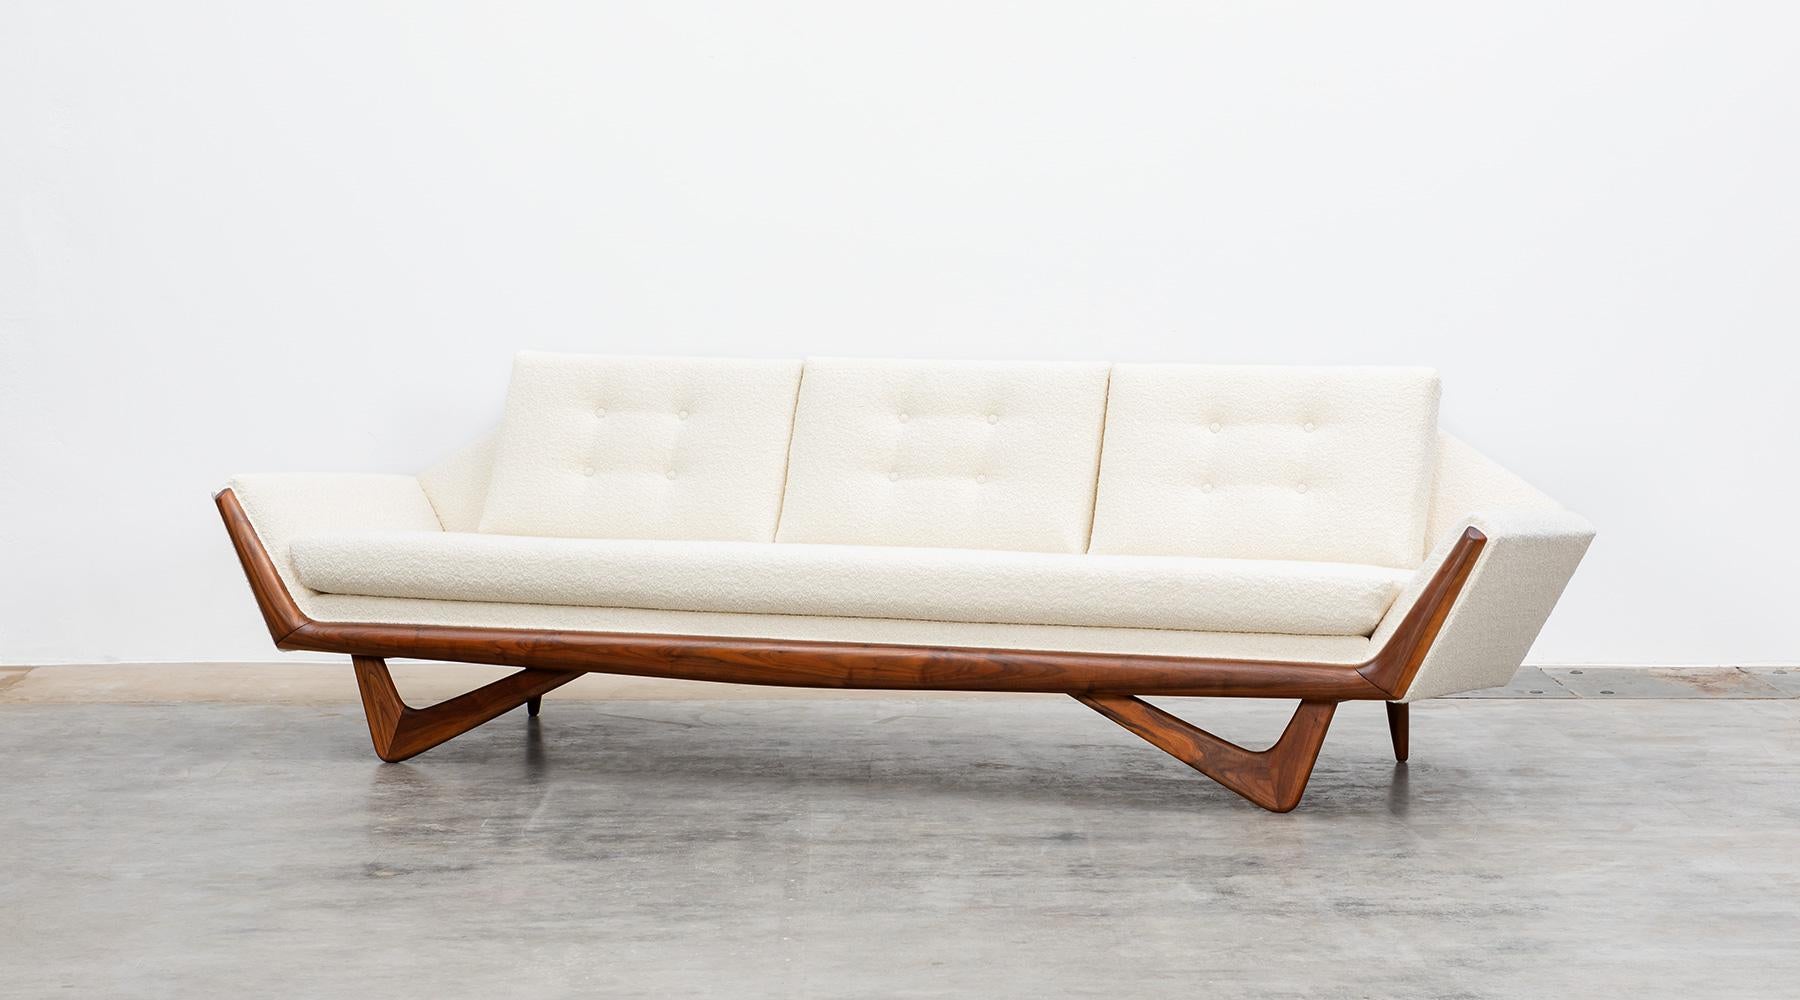 Sofa by Adrian Pearsall, walnut base, new upholstery (fabric by Dedar), USA, 1965.

Stunning Sofa designed by American Adrian Pearsall. The sofa comes new upholstered in off white high-quality Dedar fabric. The complex construction of the legs is